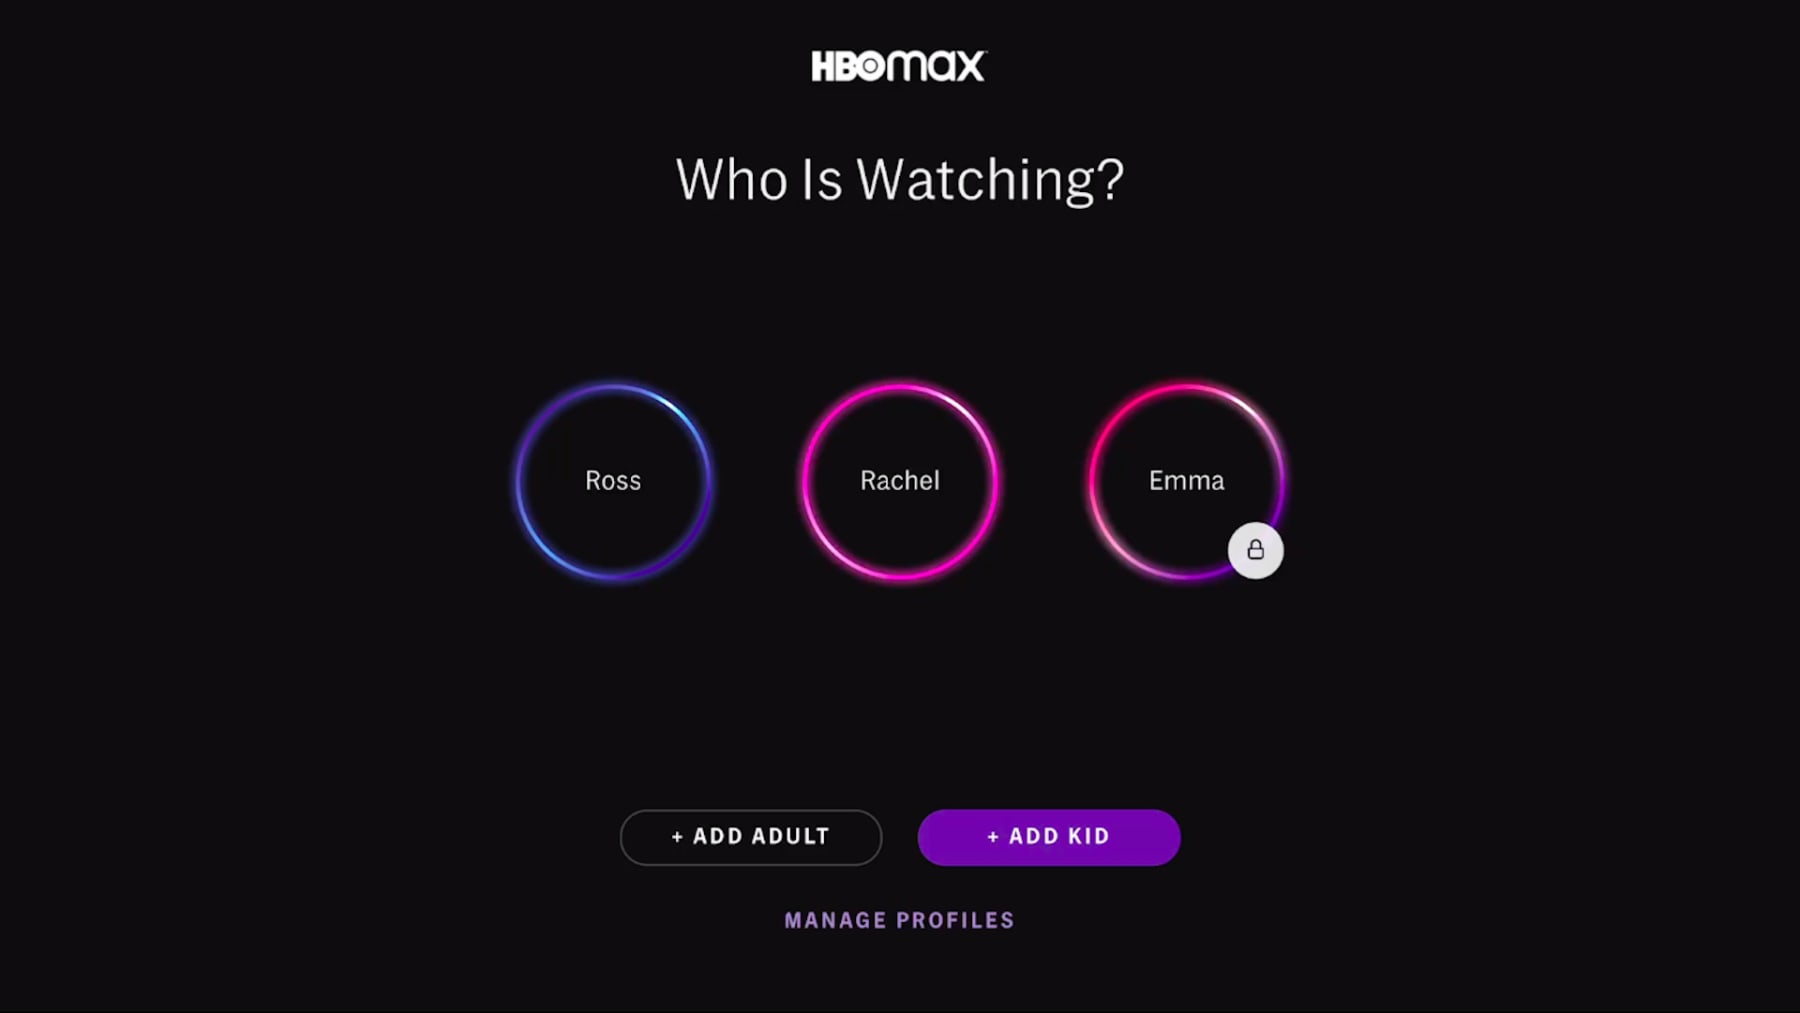 HBO Max profiles screen asks user to select who is watching.